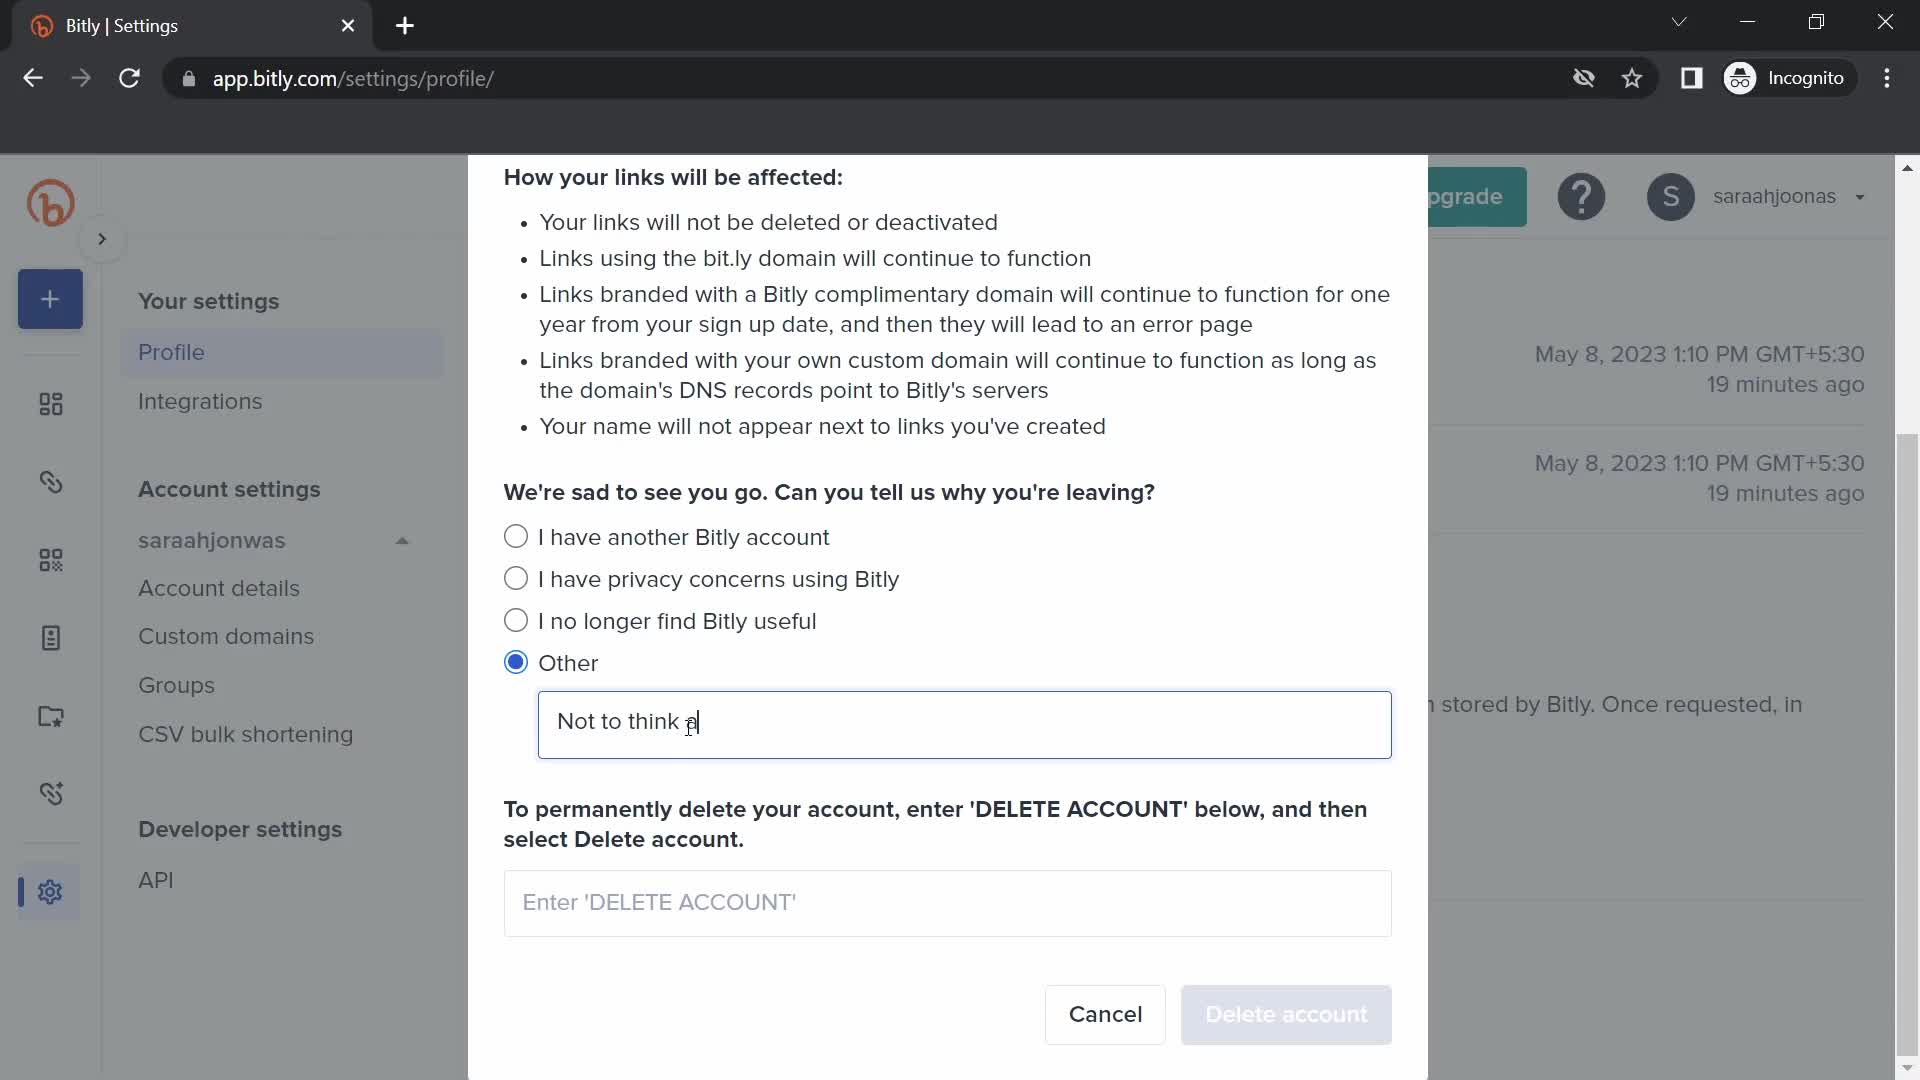 Screenshot of Delete account on Deleting your account on Bitly user flow